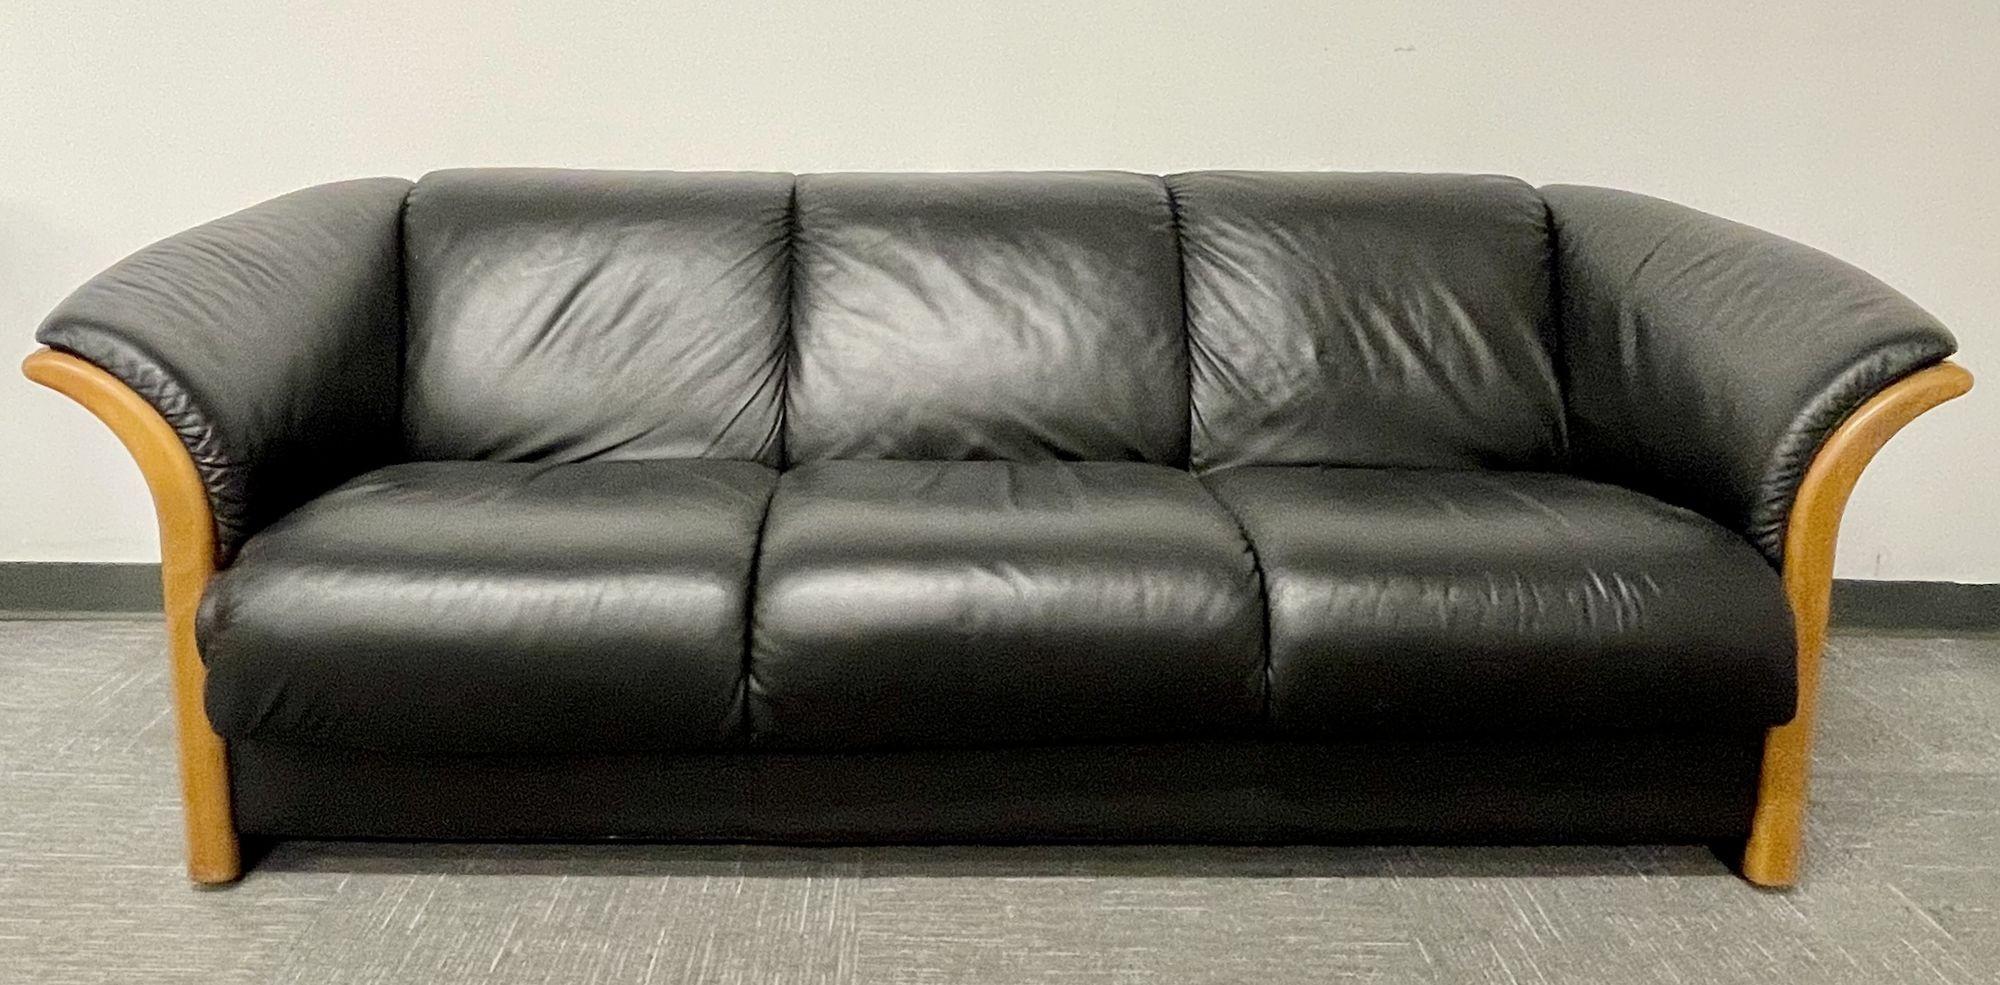 leather sofa with wood trim